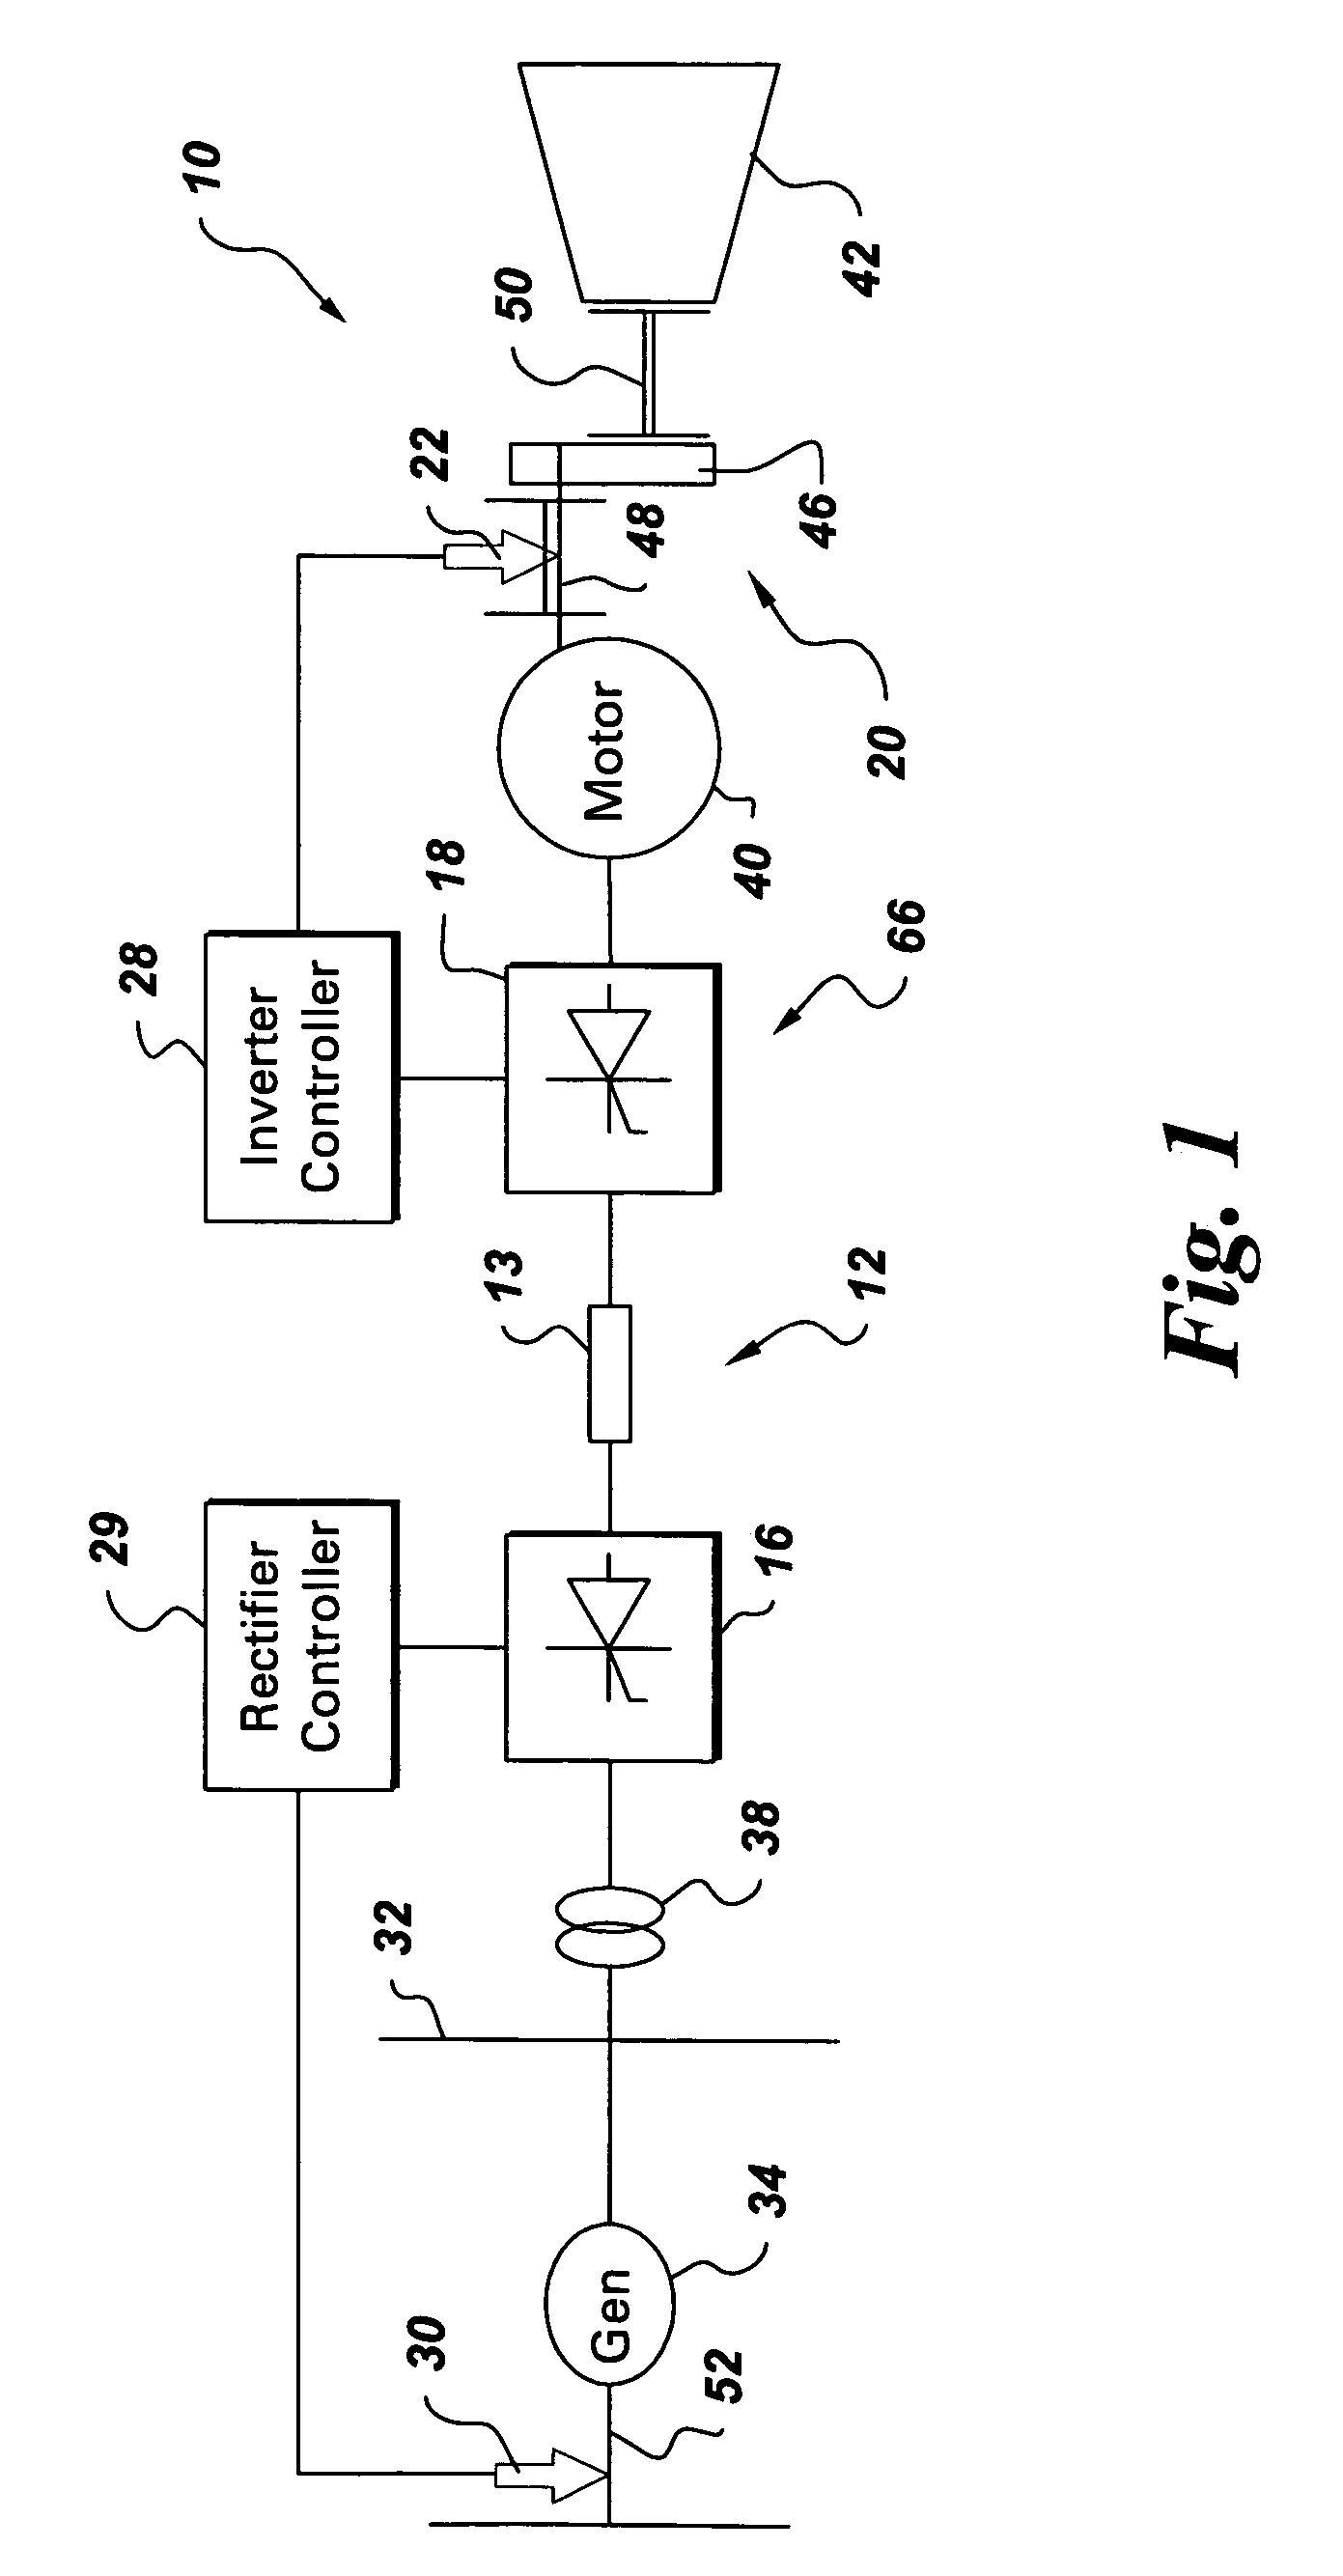 Integrated torsional mode damping system and method